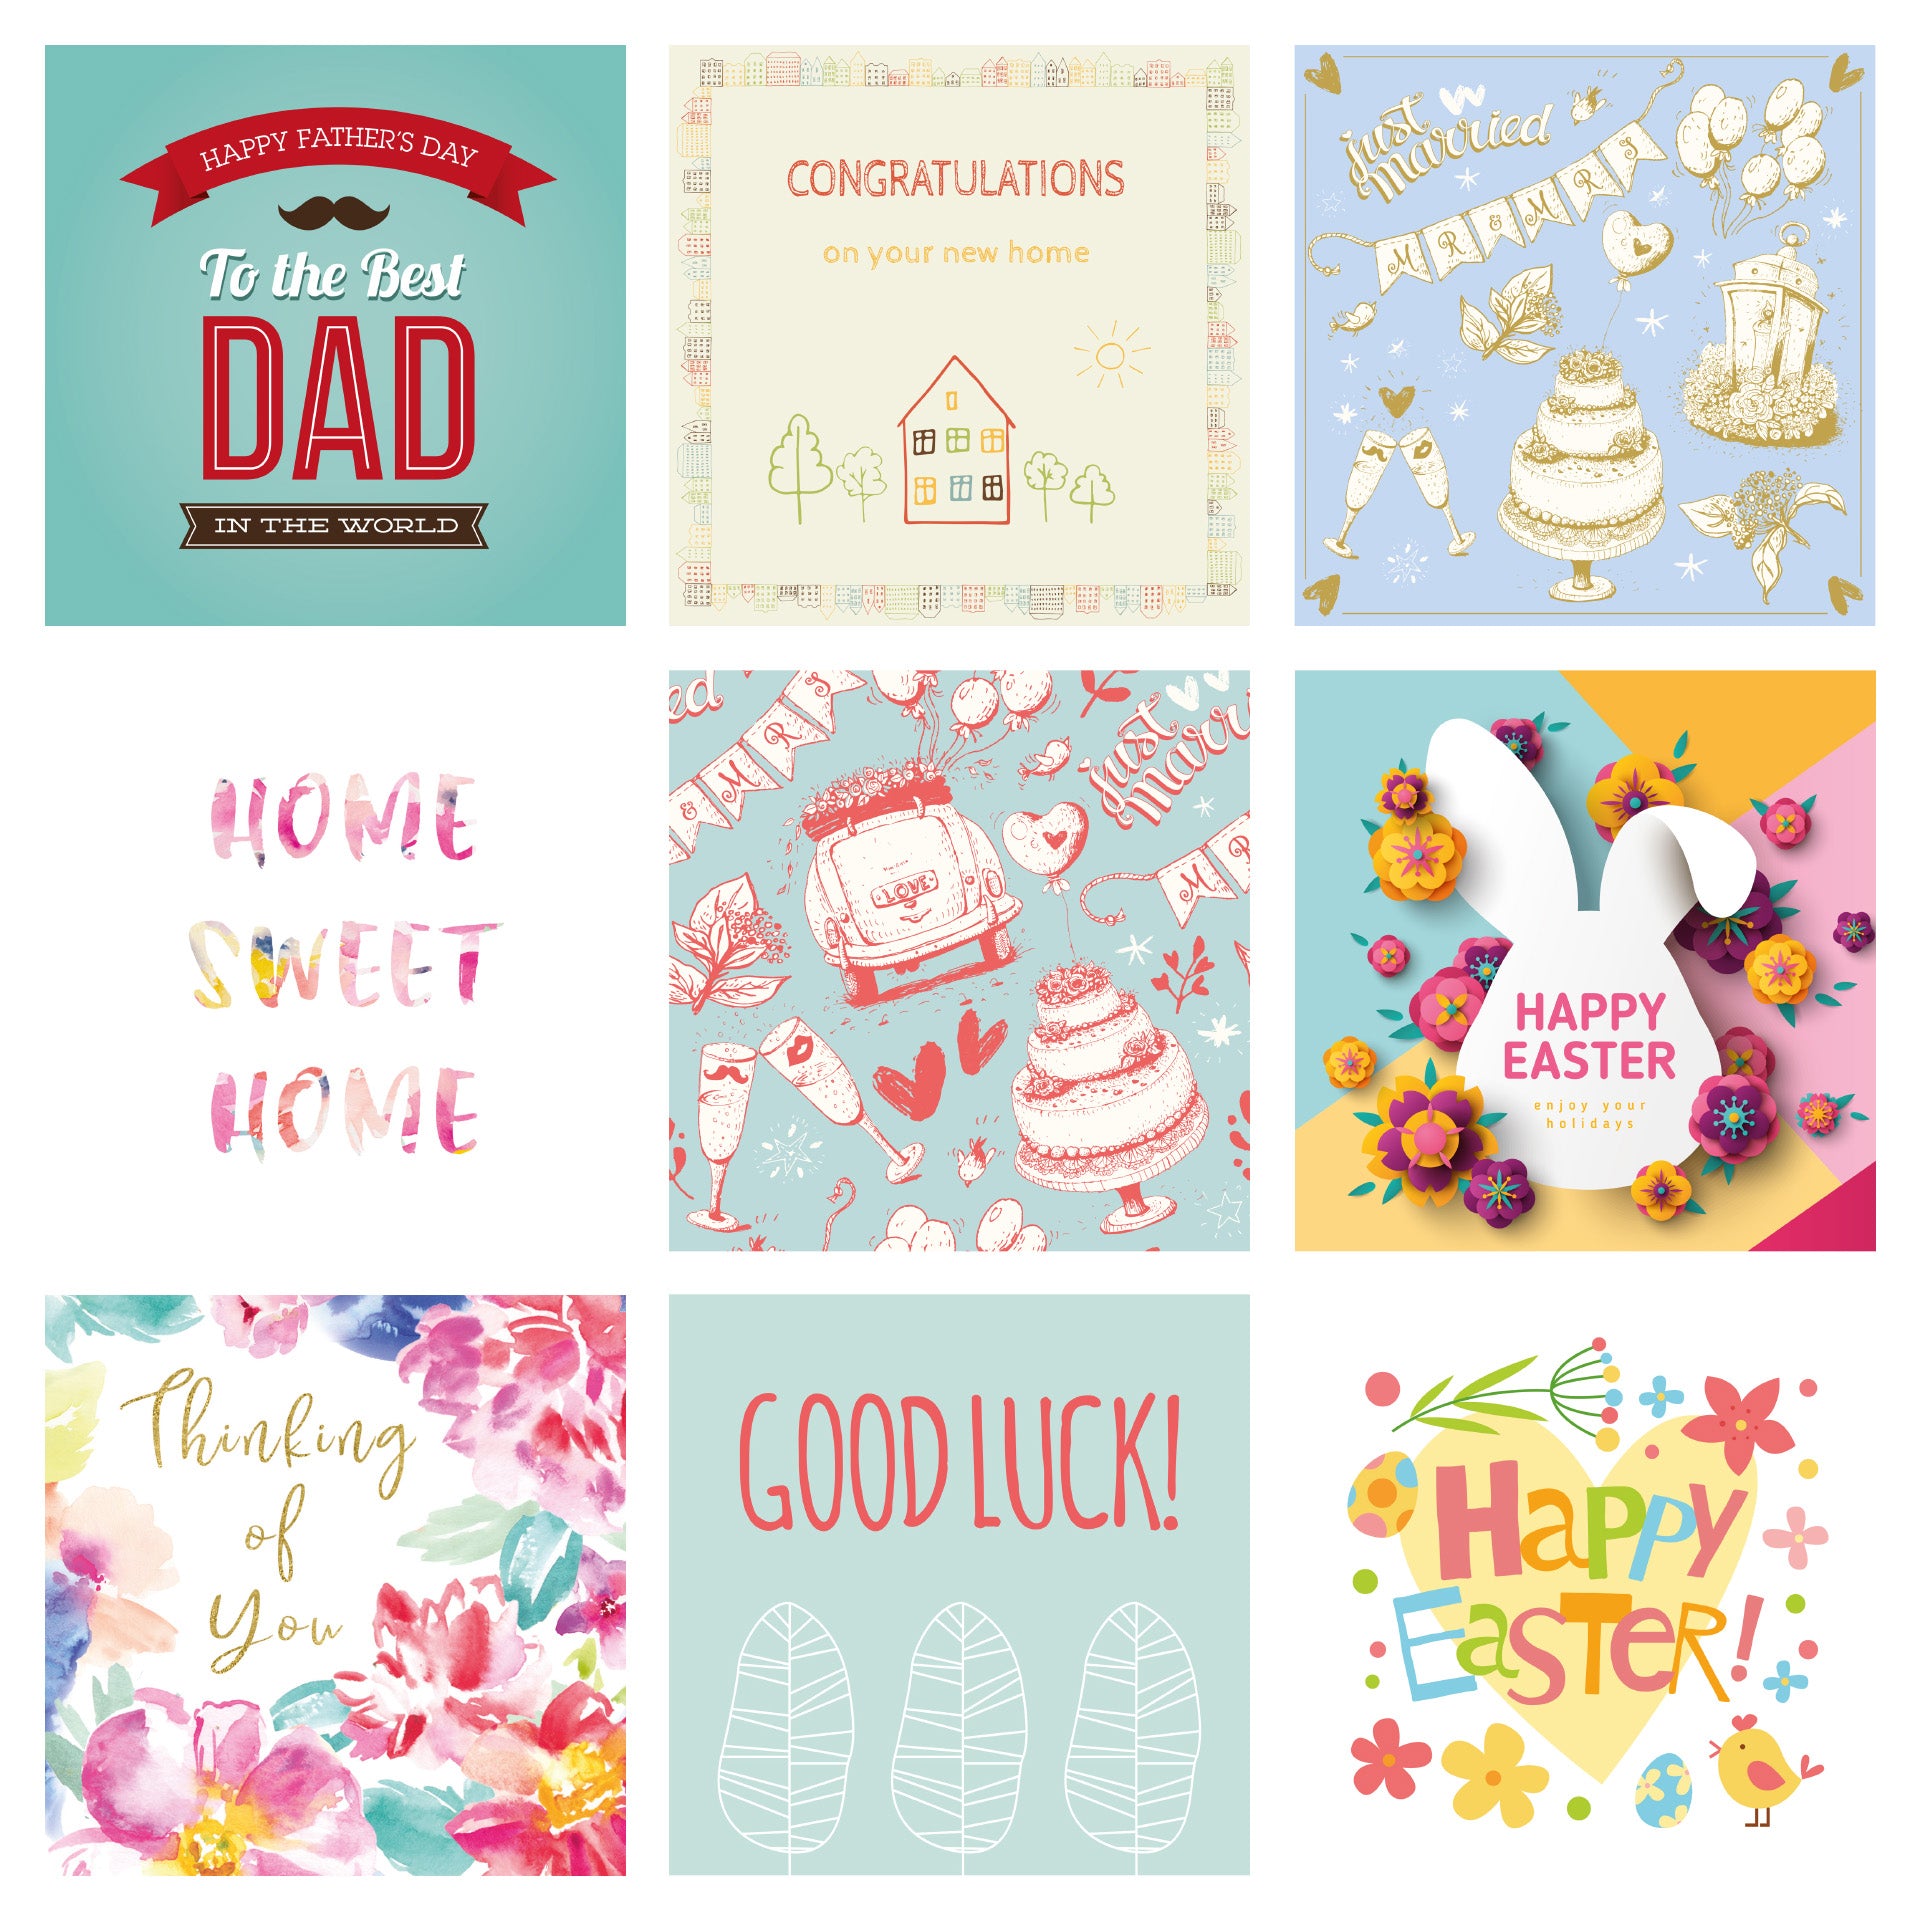 50 Assorted Greetings Cards Pack for All Occasions by Wonder Cards